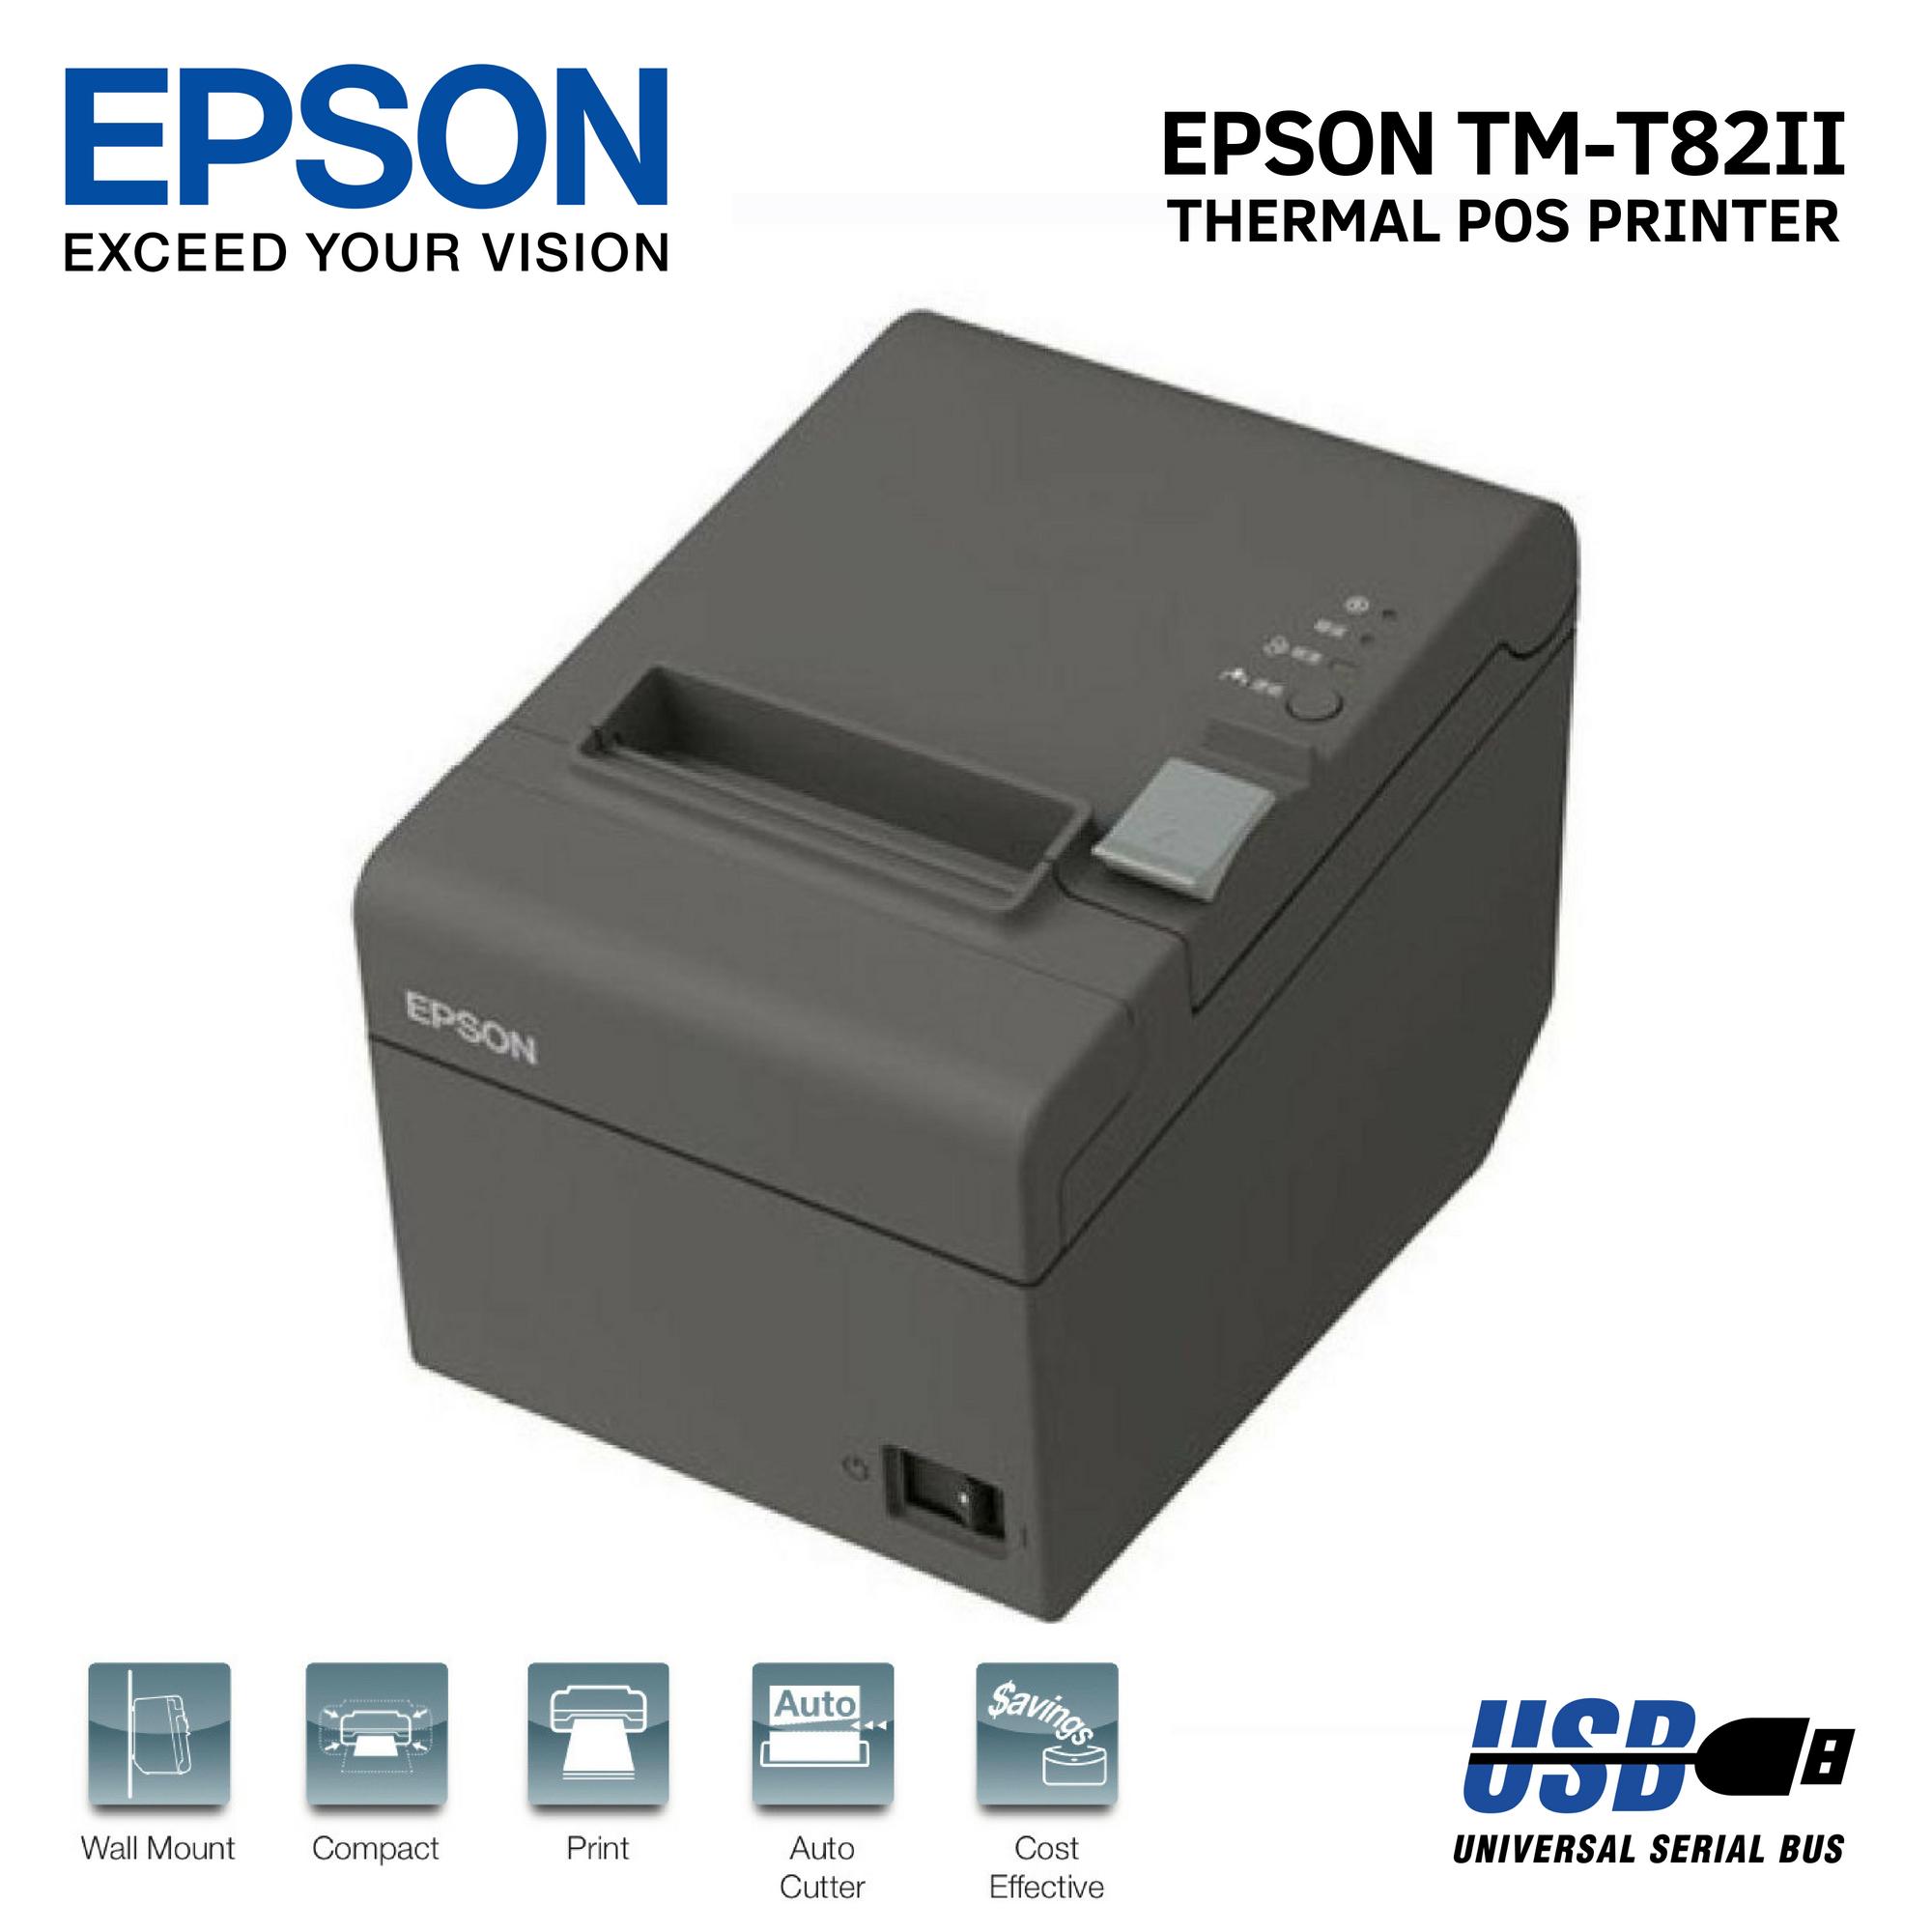 Epson Tm T82ii Thermal Pos Receipt Printer Usb Serial Review And Price 7396